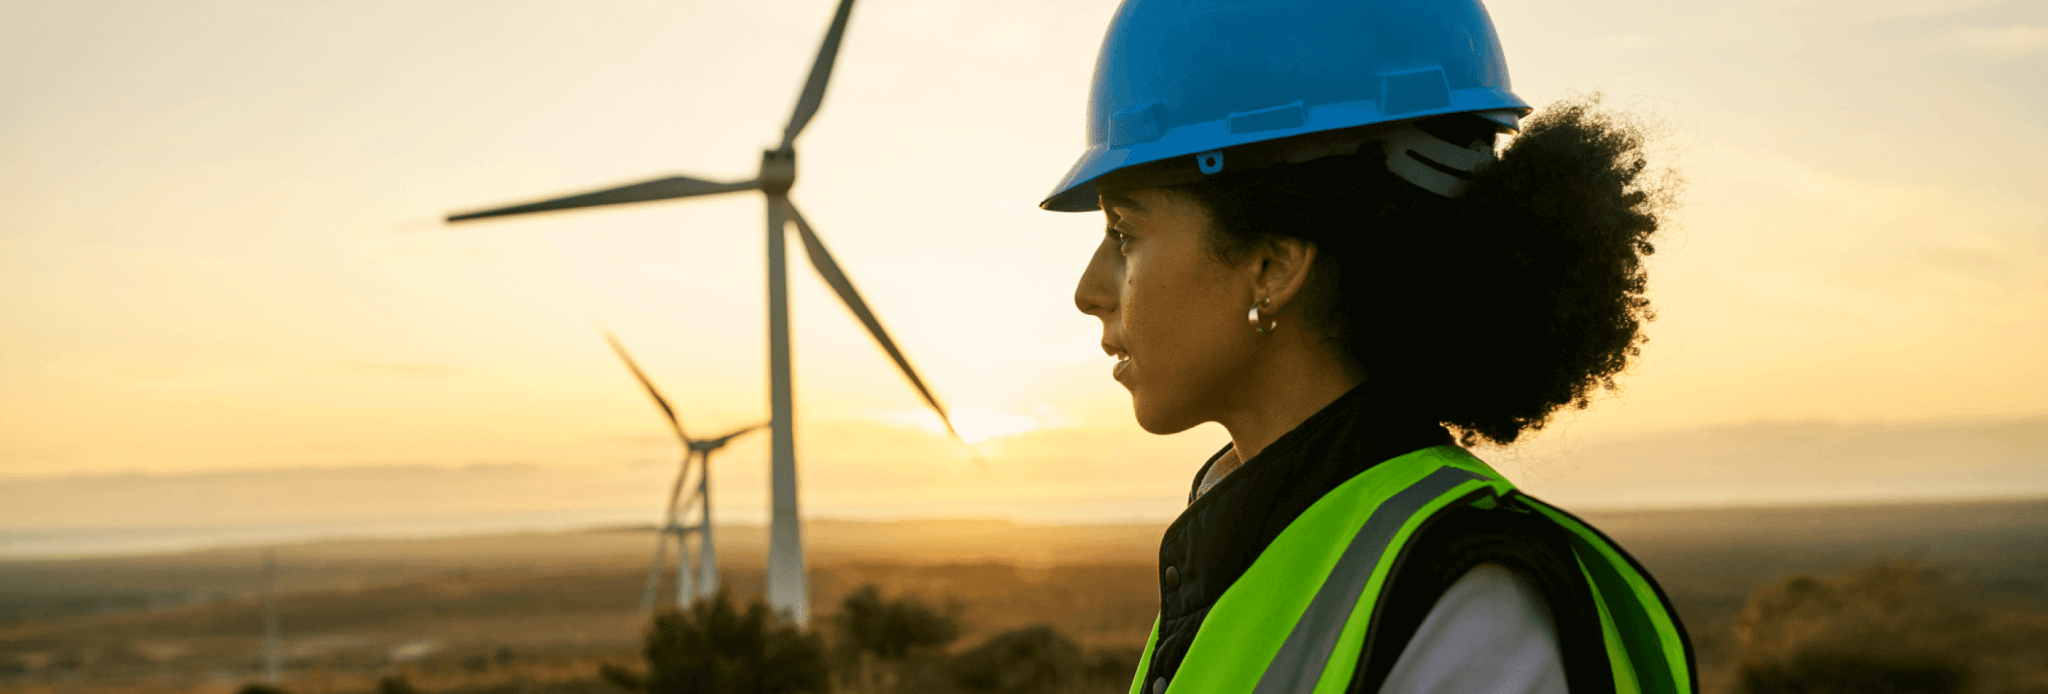 How the clean energy economy can create more equitable workforce transitions